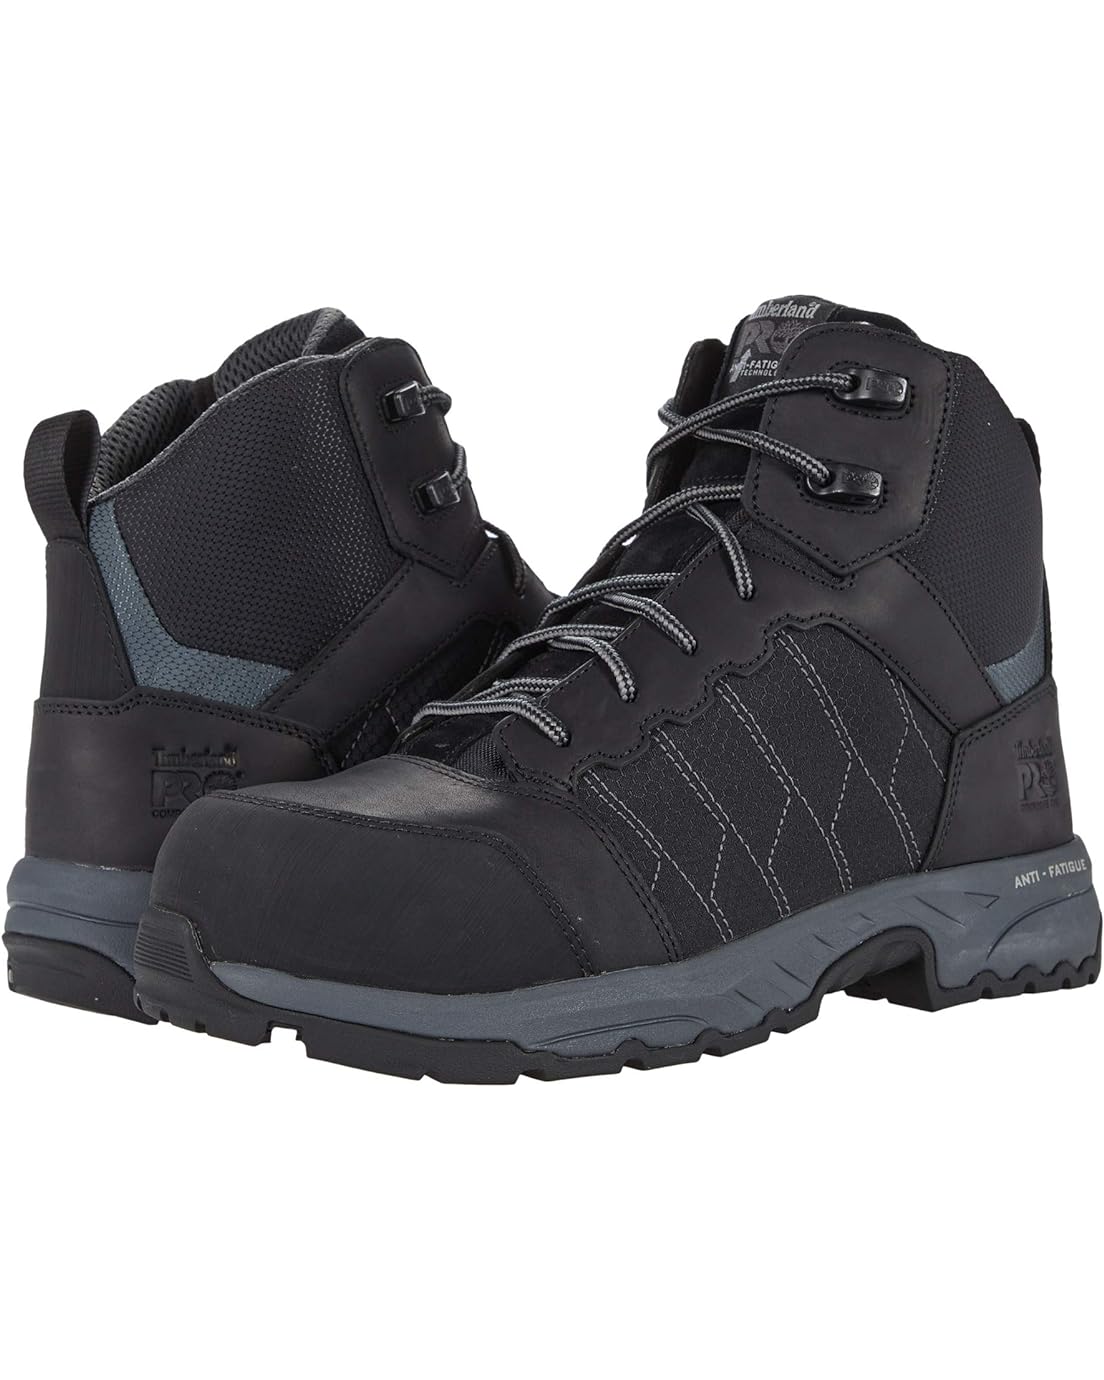 Timberland PRO Payload 6 Composite Safety Toe